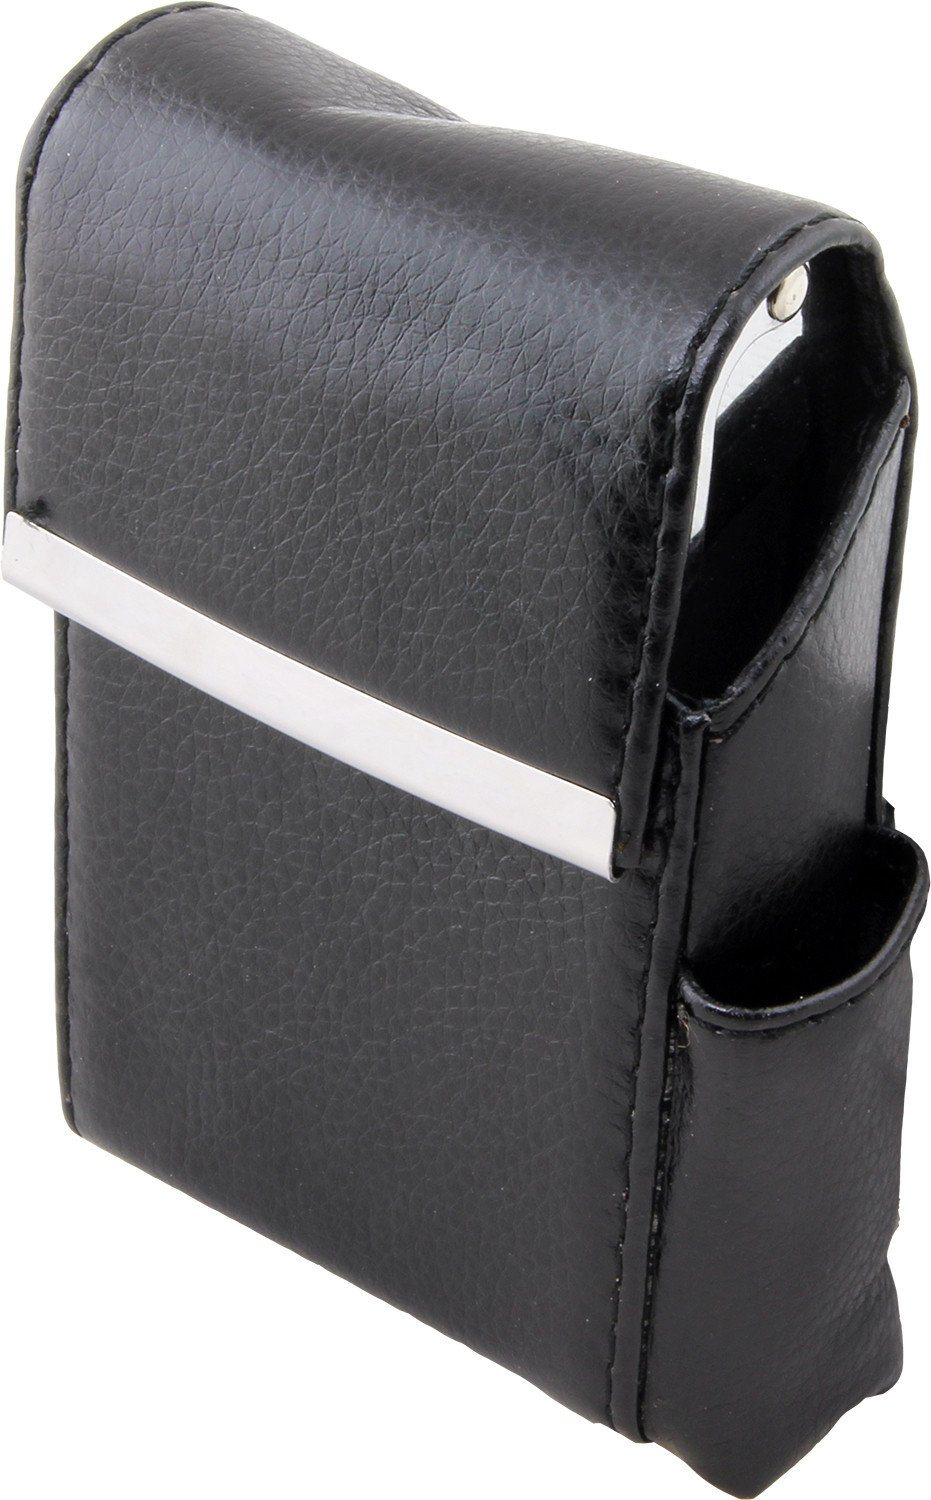 Luxury Genuine Leather Black Flip Top Cigarette Case - Assorted Color Available